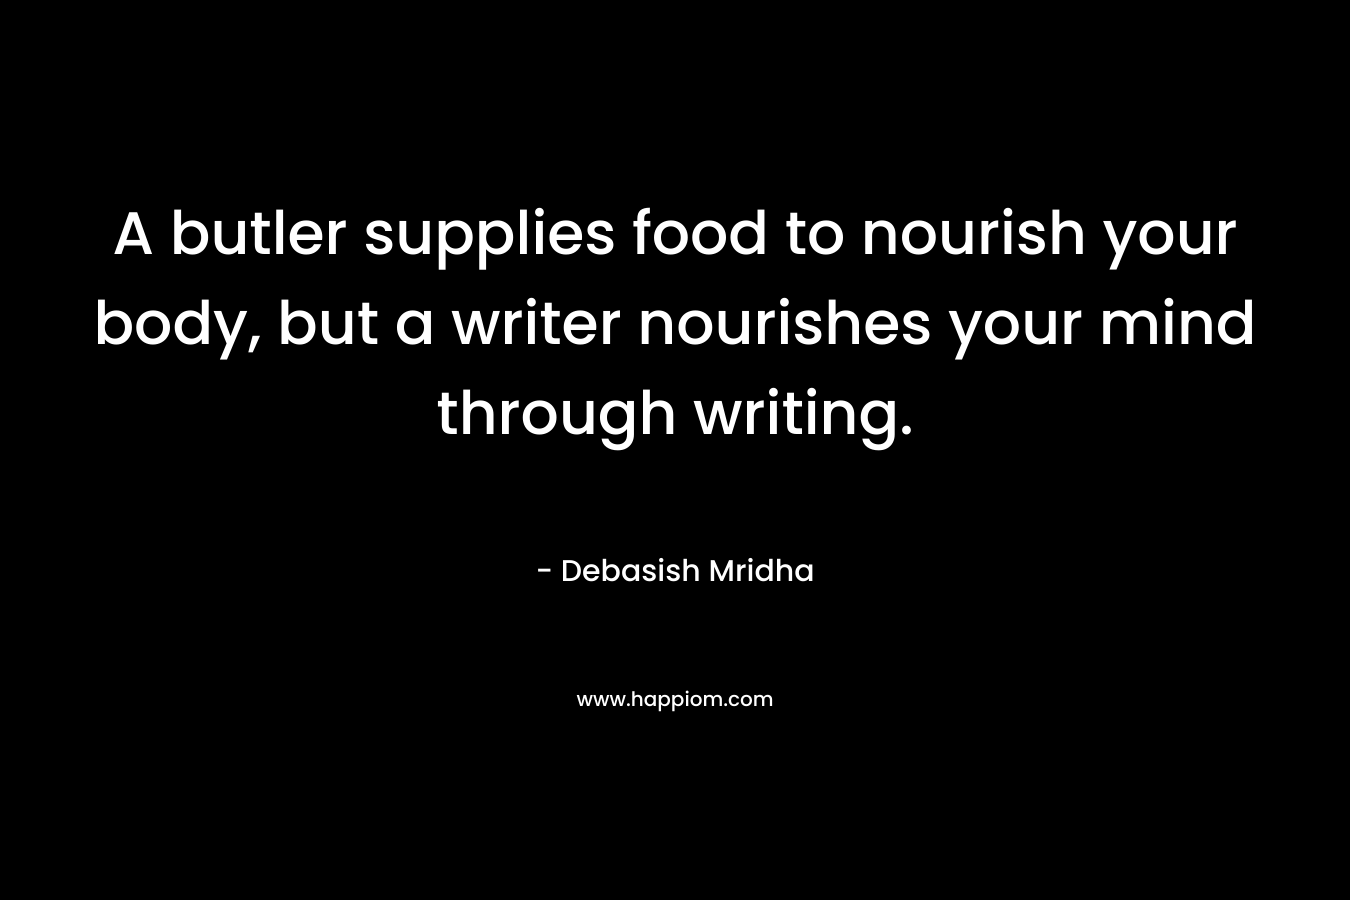 A butler supplies food to nourish your body, but a writer nourishes your mind through writing.